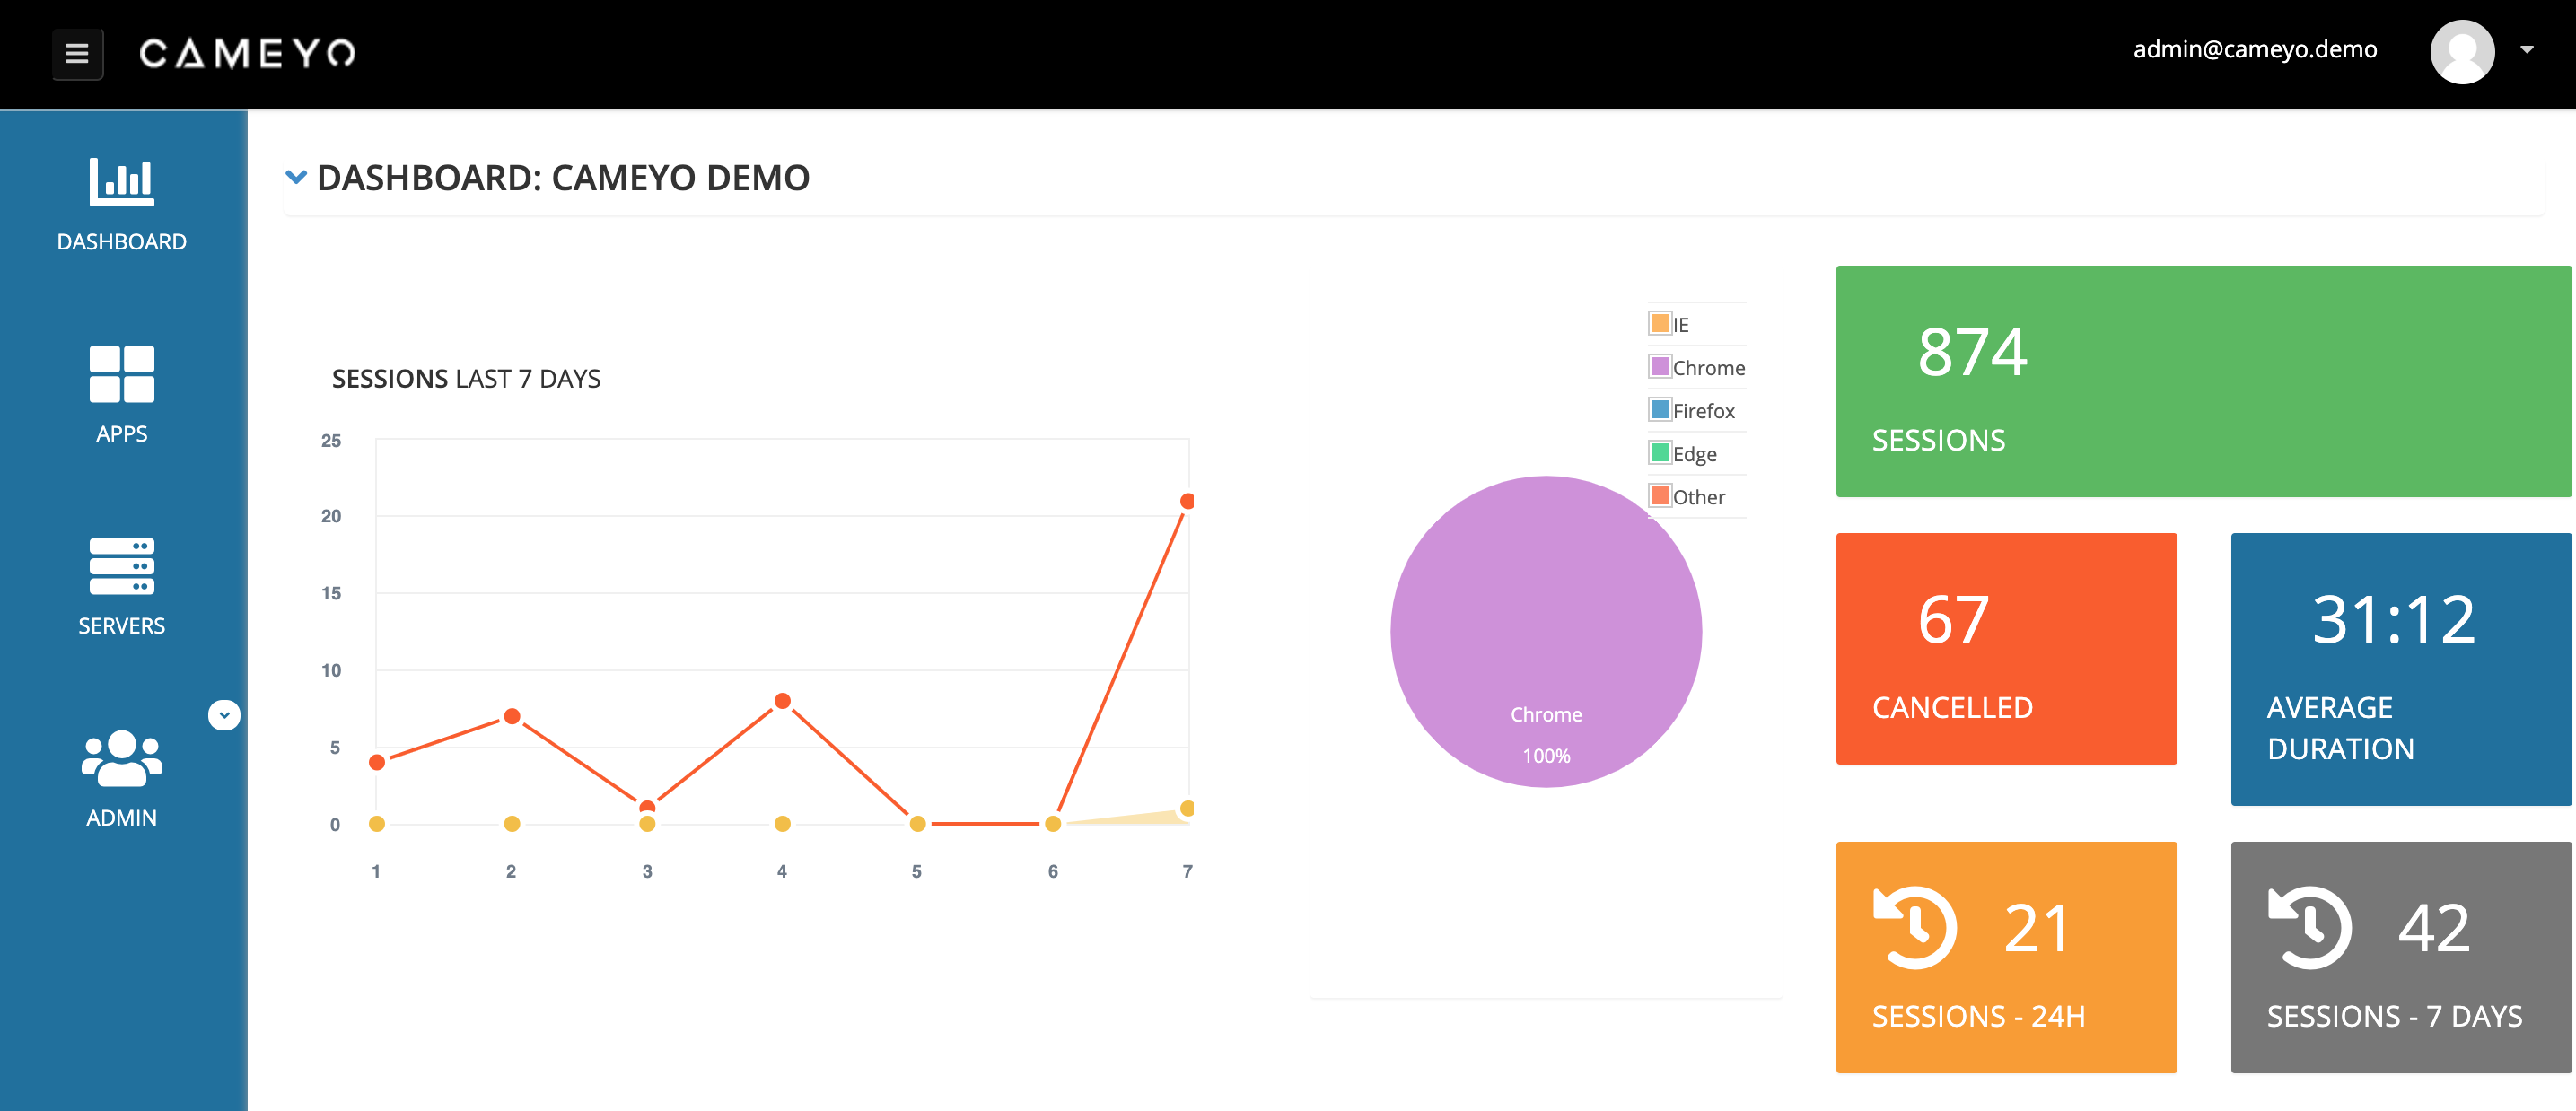 Cameyo_Admin Dashboard_Session View